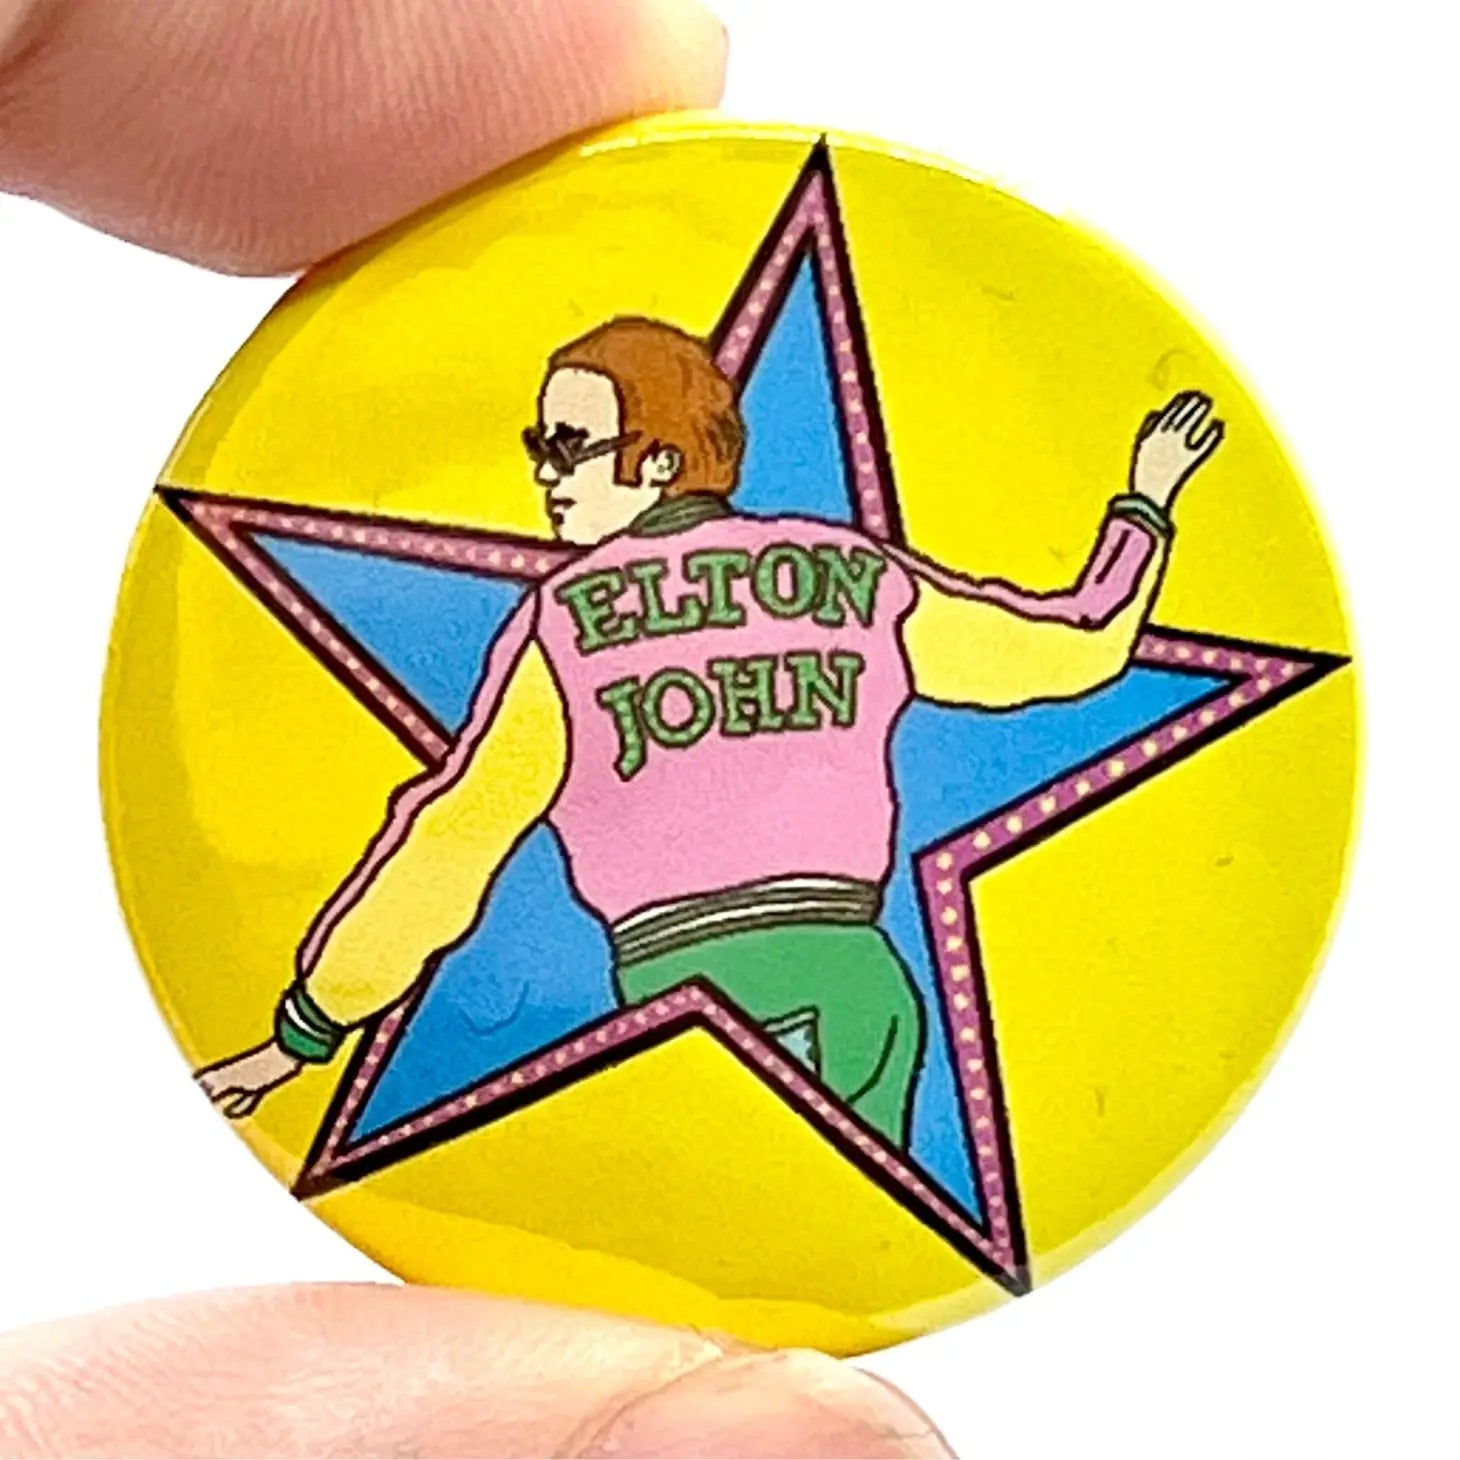 neon colored illustration of Elton John from the cover of the album ﻿Goodbye Yellow Brick Road on a chartreuse background on a 1 1/2” round pinback button